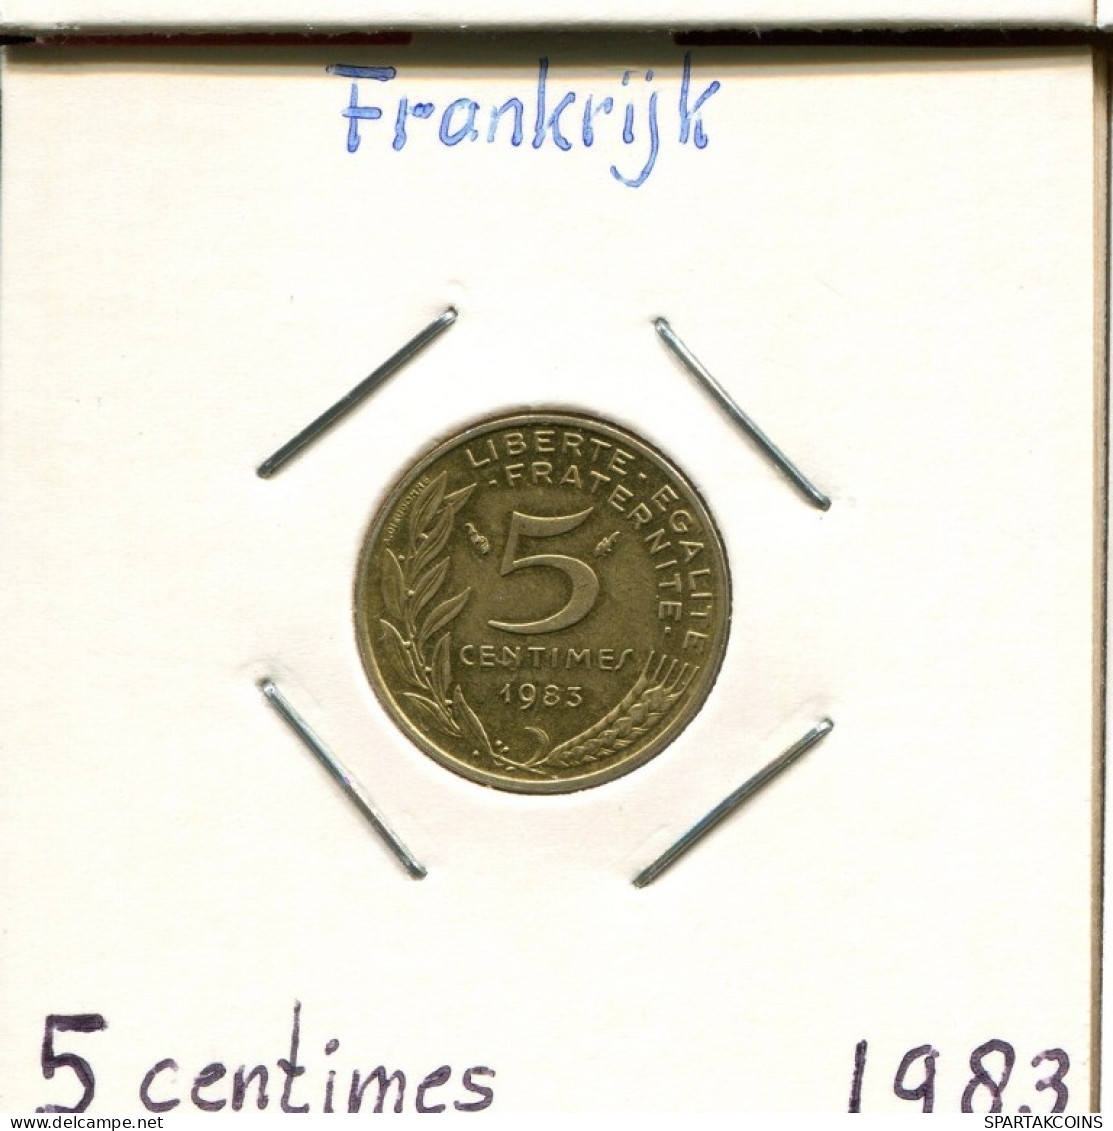 5 CENTIMES 1983 FRANCE Coin French Coin #AM052.U.A - 5 Centimes